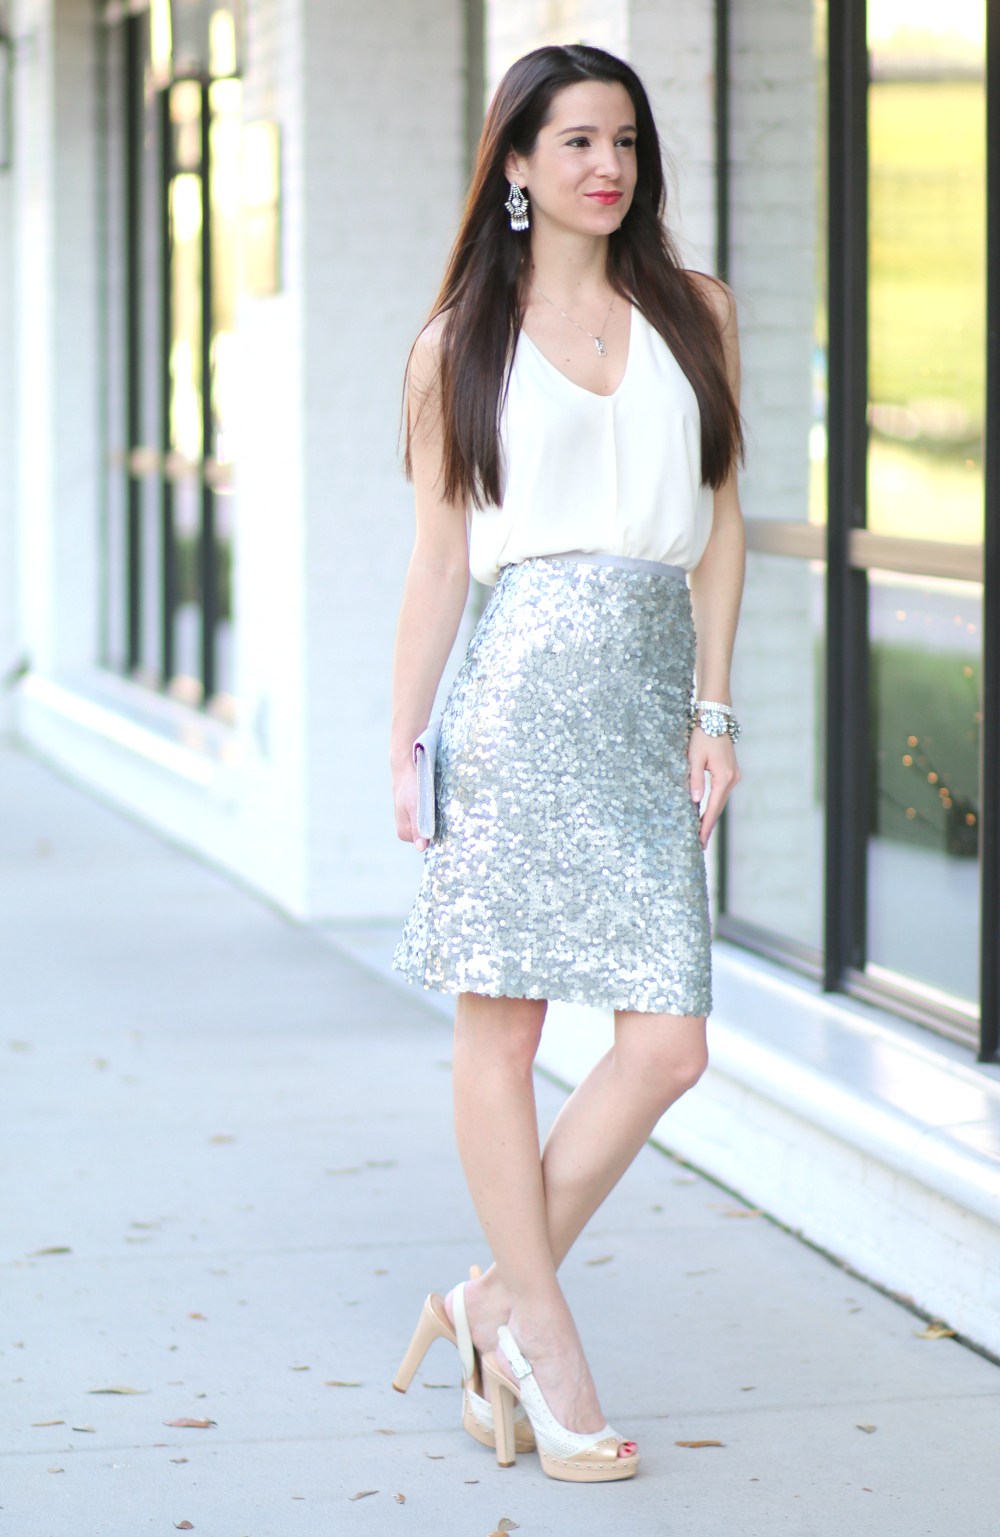 New Year's Outfit, NYE Outfit, Sequin Pencil Skirt, J. Crew Pencil Skirt, Stephanie Ziajka, Diary of a Debutante